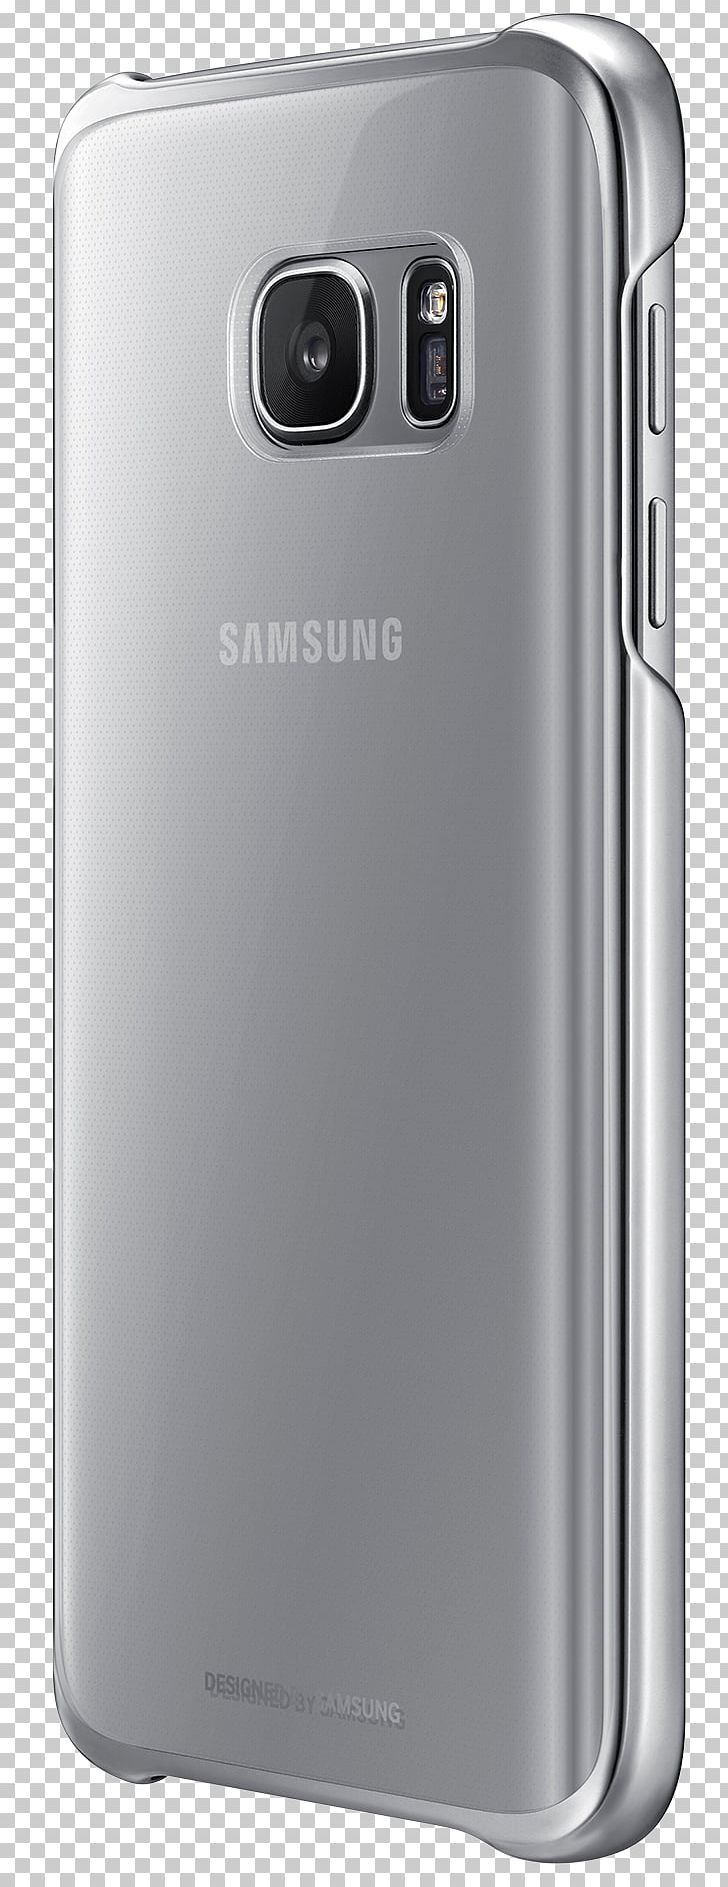 Samsung GALAXY S7 Edge Feature Phone Telephone PNG, Clipart, Cellular Network, Electronic Device, Gadget, Galaxy S 7, Logos Free PNG Download